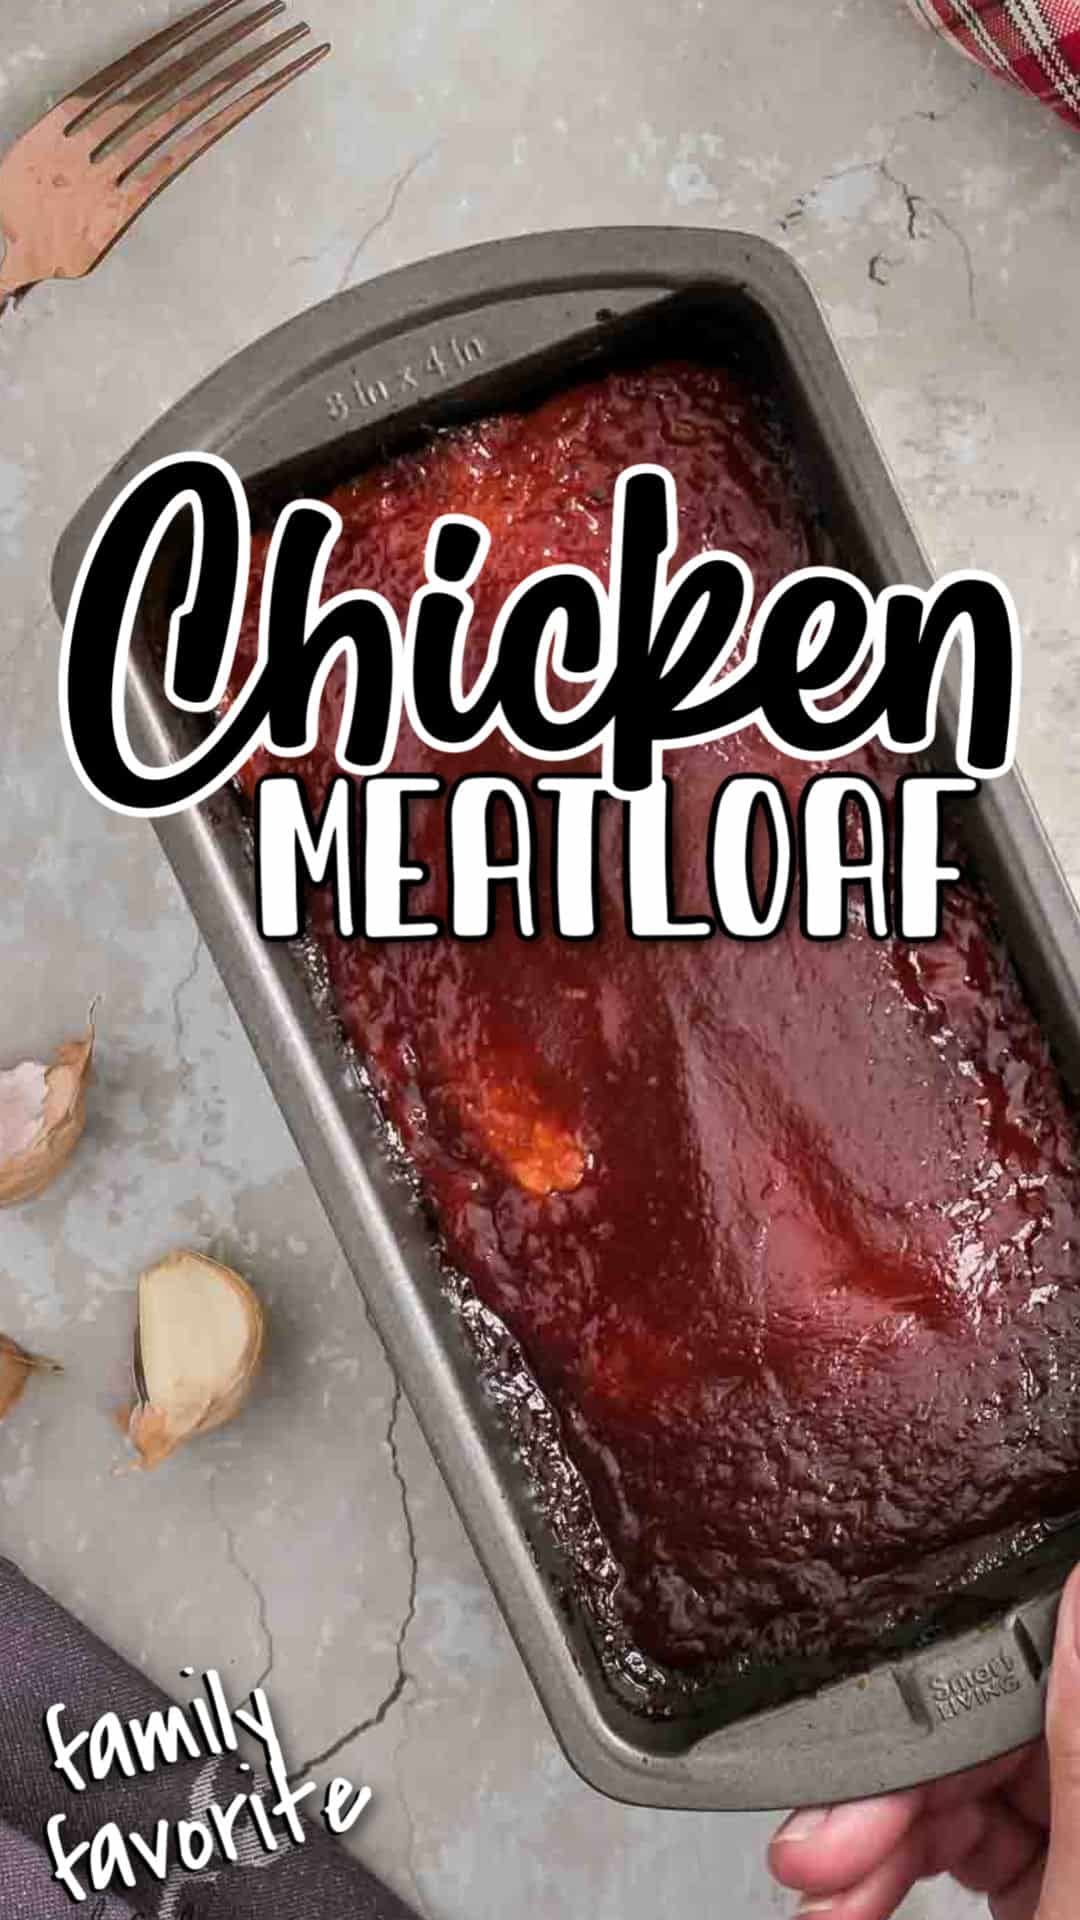 Juicy, tender chicken meatloaf with a coating of zesty barbecue sauce. It's perfect comfort food for busy days. #cheerfulcook #chicken #meatloaf #comfortfood ♡ cheerfulcook.com via @cheerfulcook